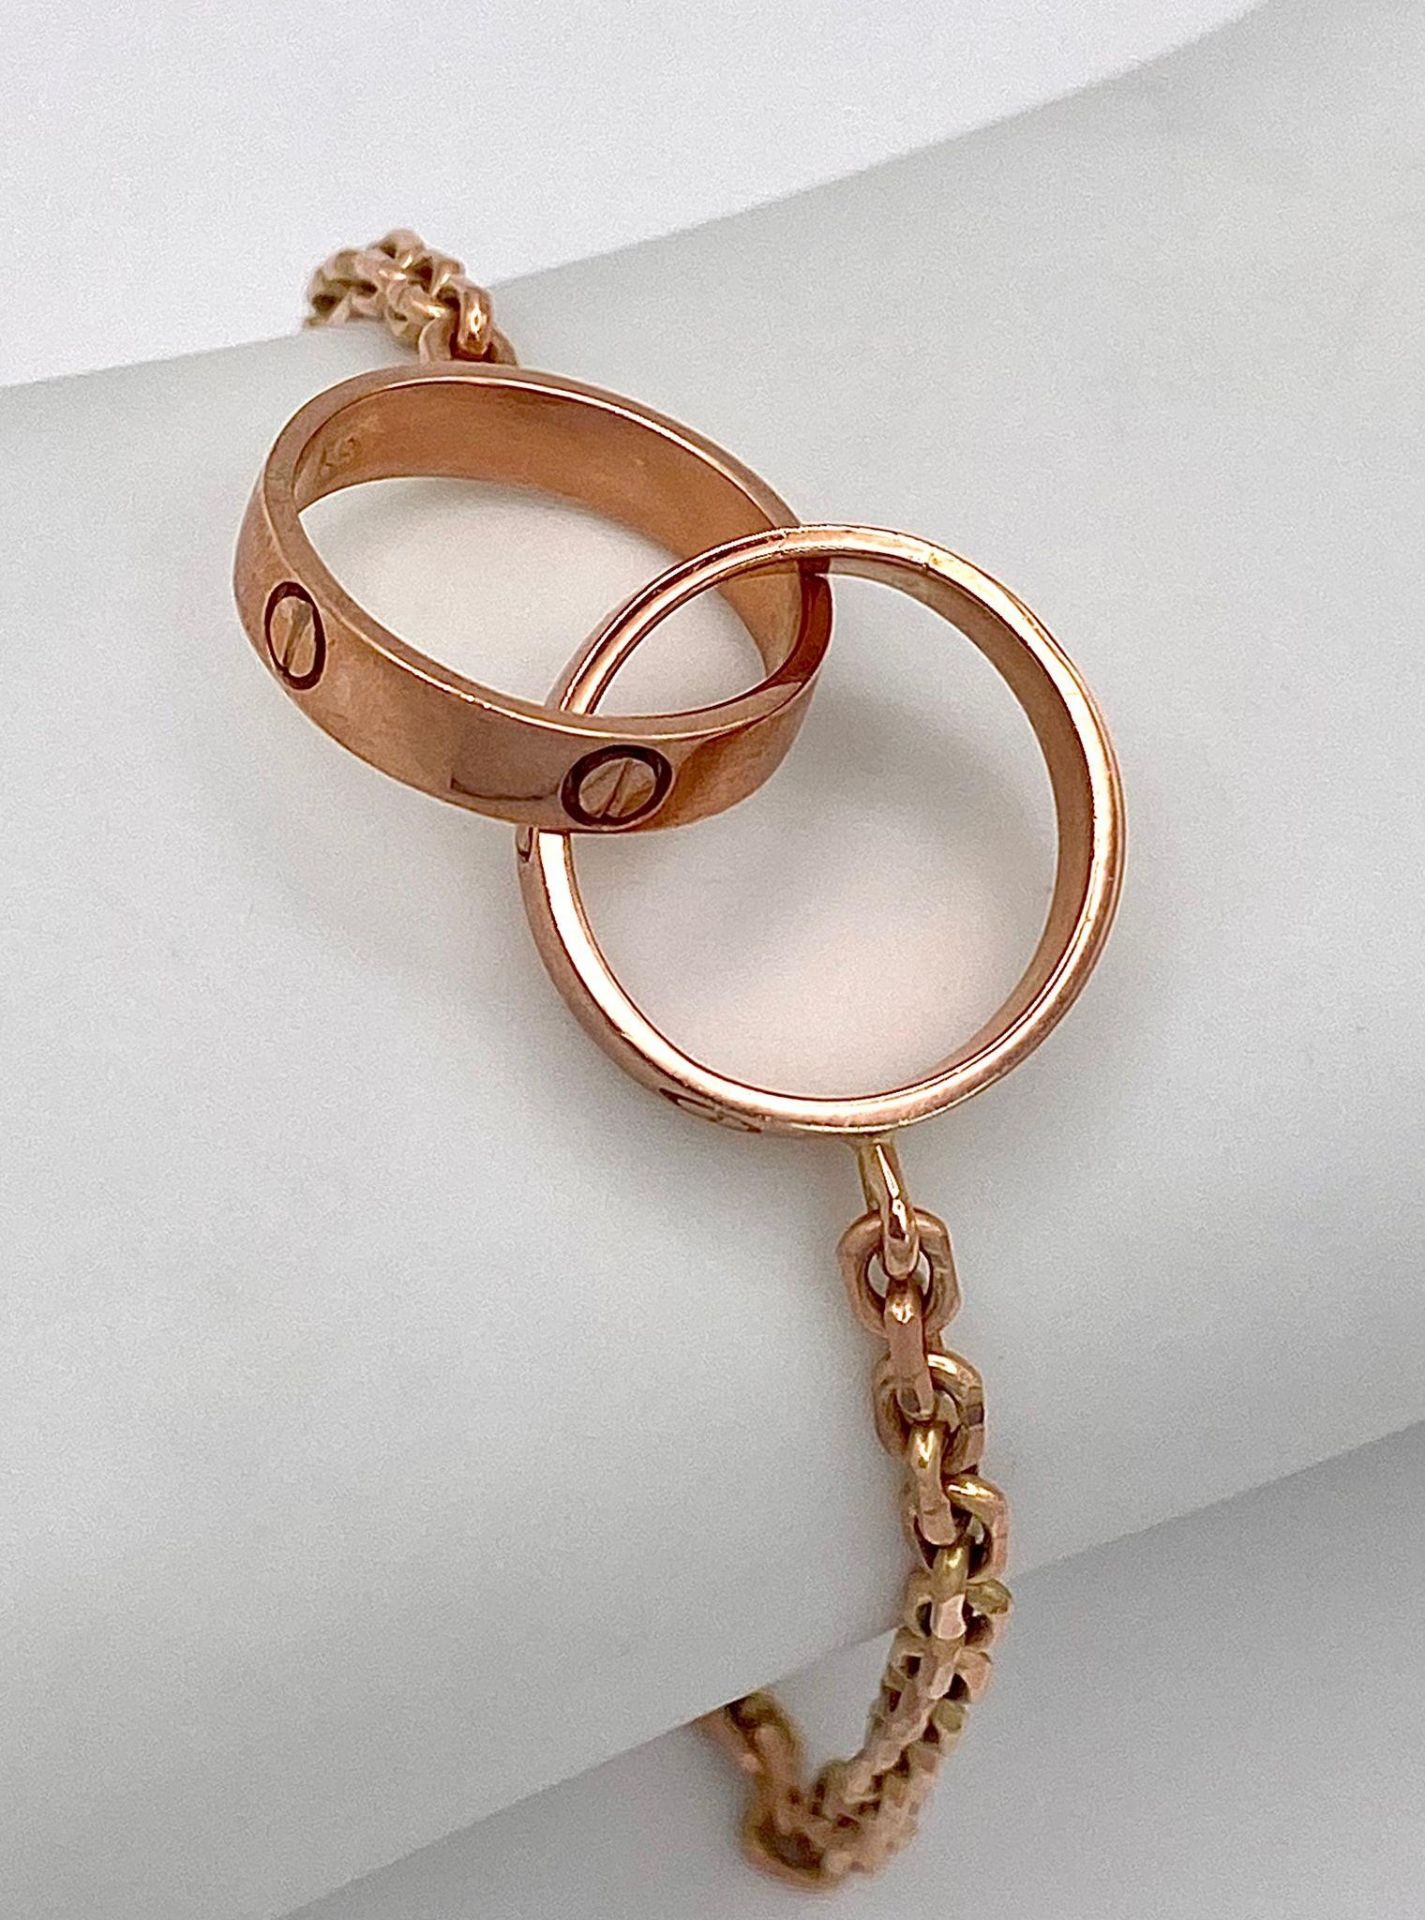 A 9K Rose Gold Entwined Ring Bracelet. 18cm length. 10.7g weight. - Image 2 of 4